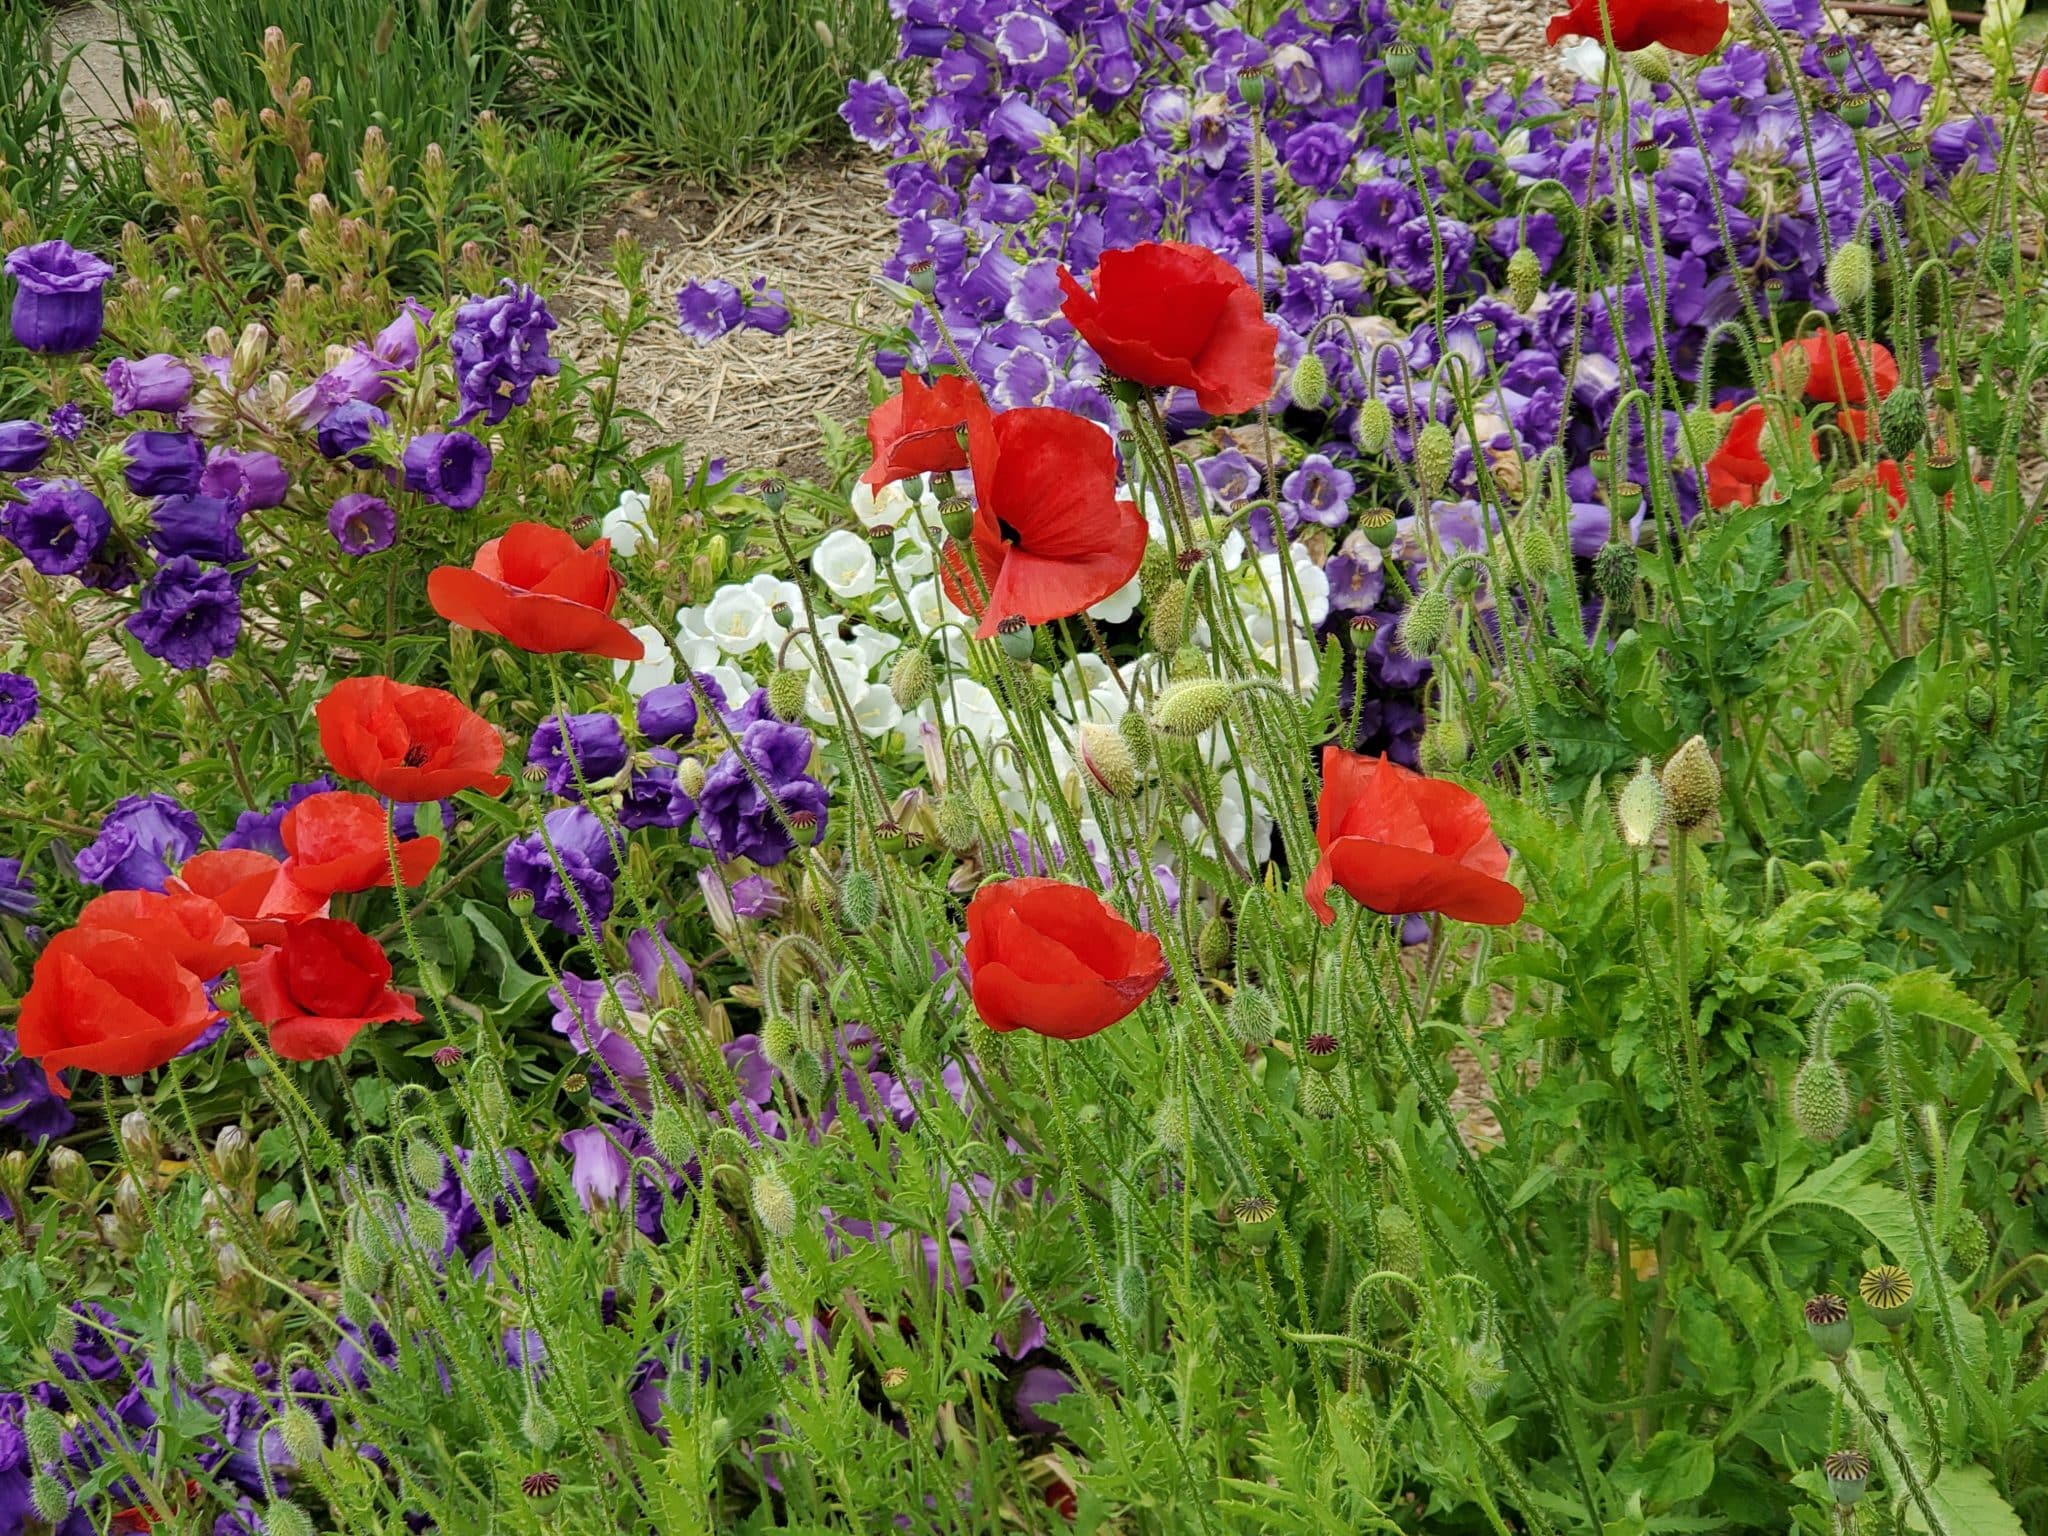 Red poppies in the foreground, purple and white canterburies in the background. Green foliage surrounding the botton of the photograph.